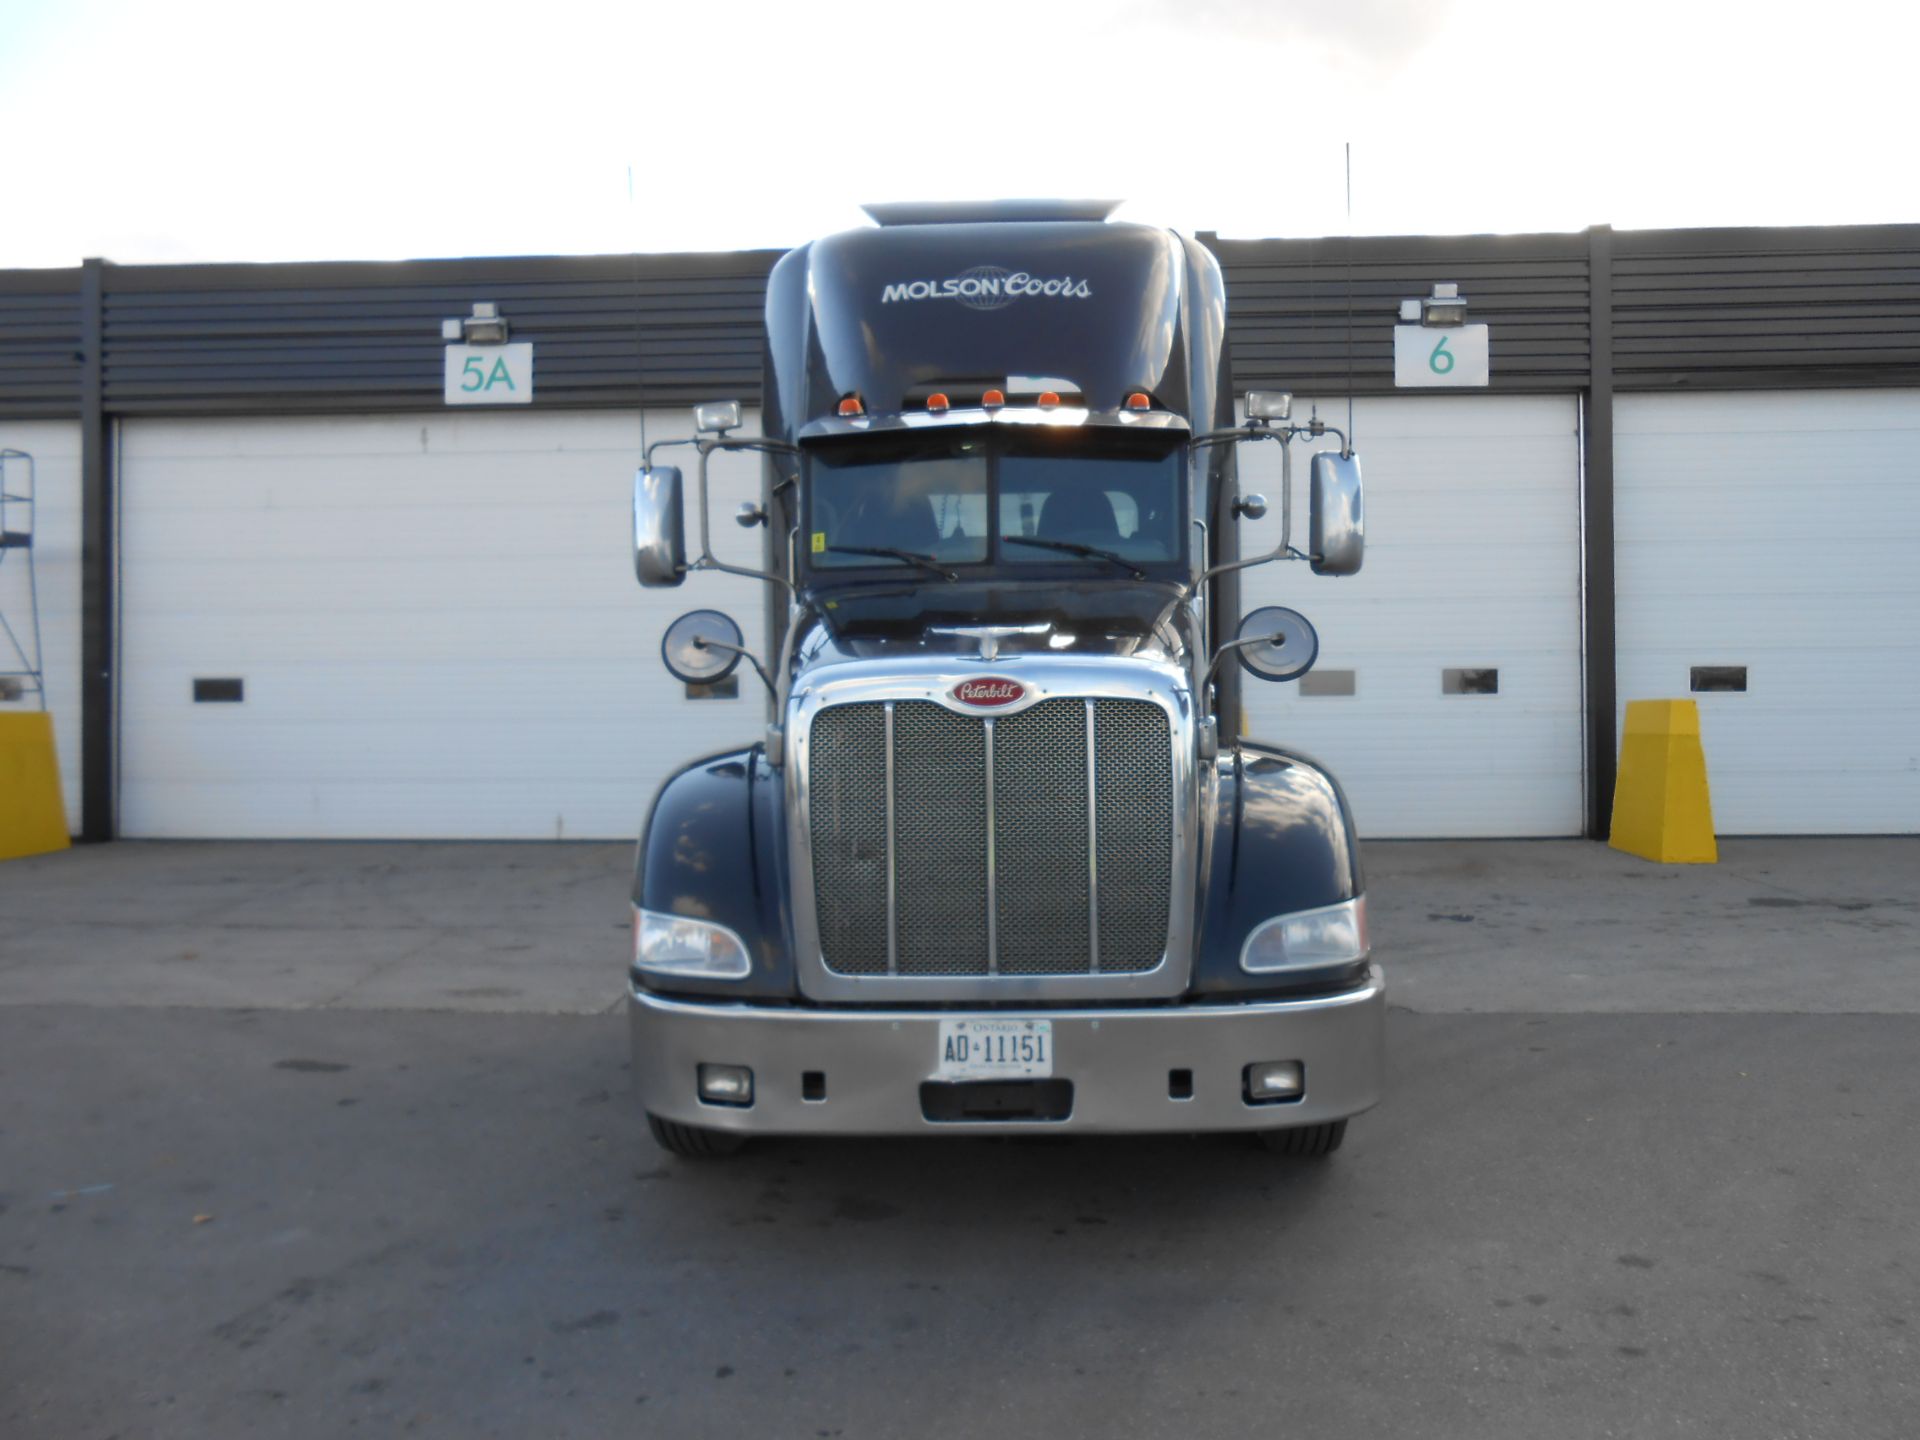 2011 Peterbilt 6X4 DAY CAB TRUCK, model 386 chassis 8070 kg weight with Cummins ISX15 485 diesel ( - Image 3 of 16